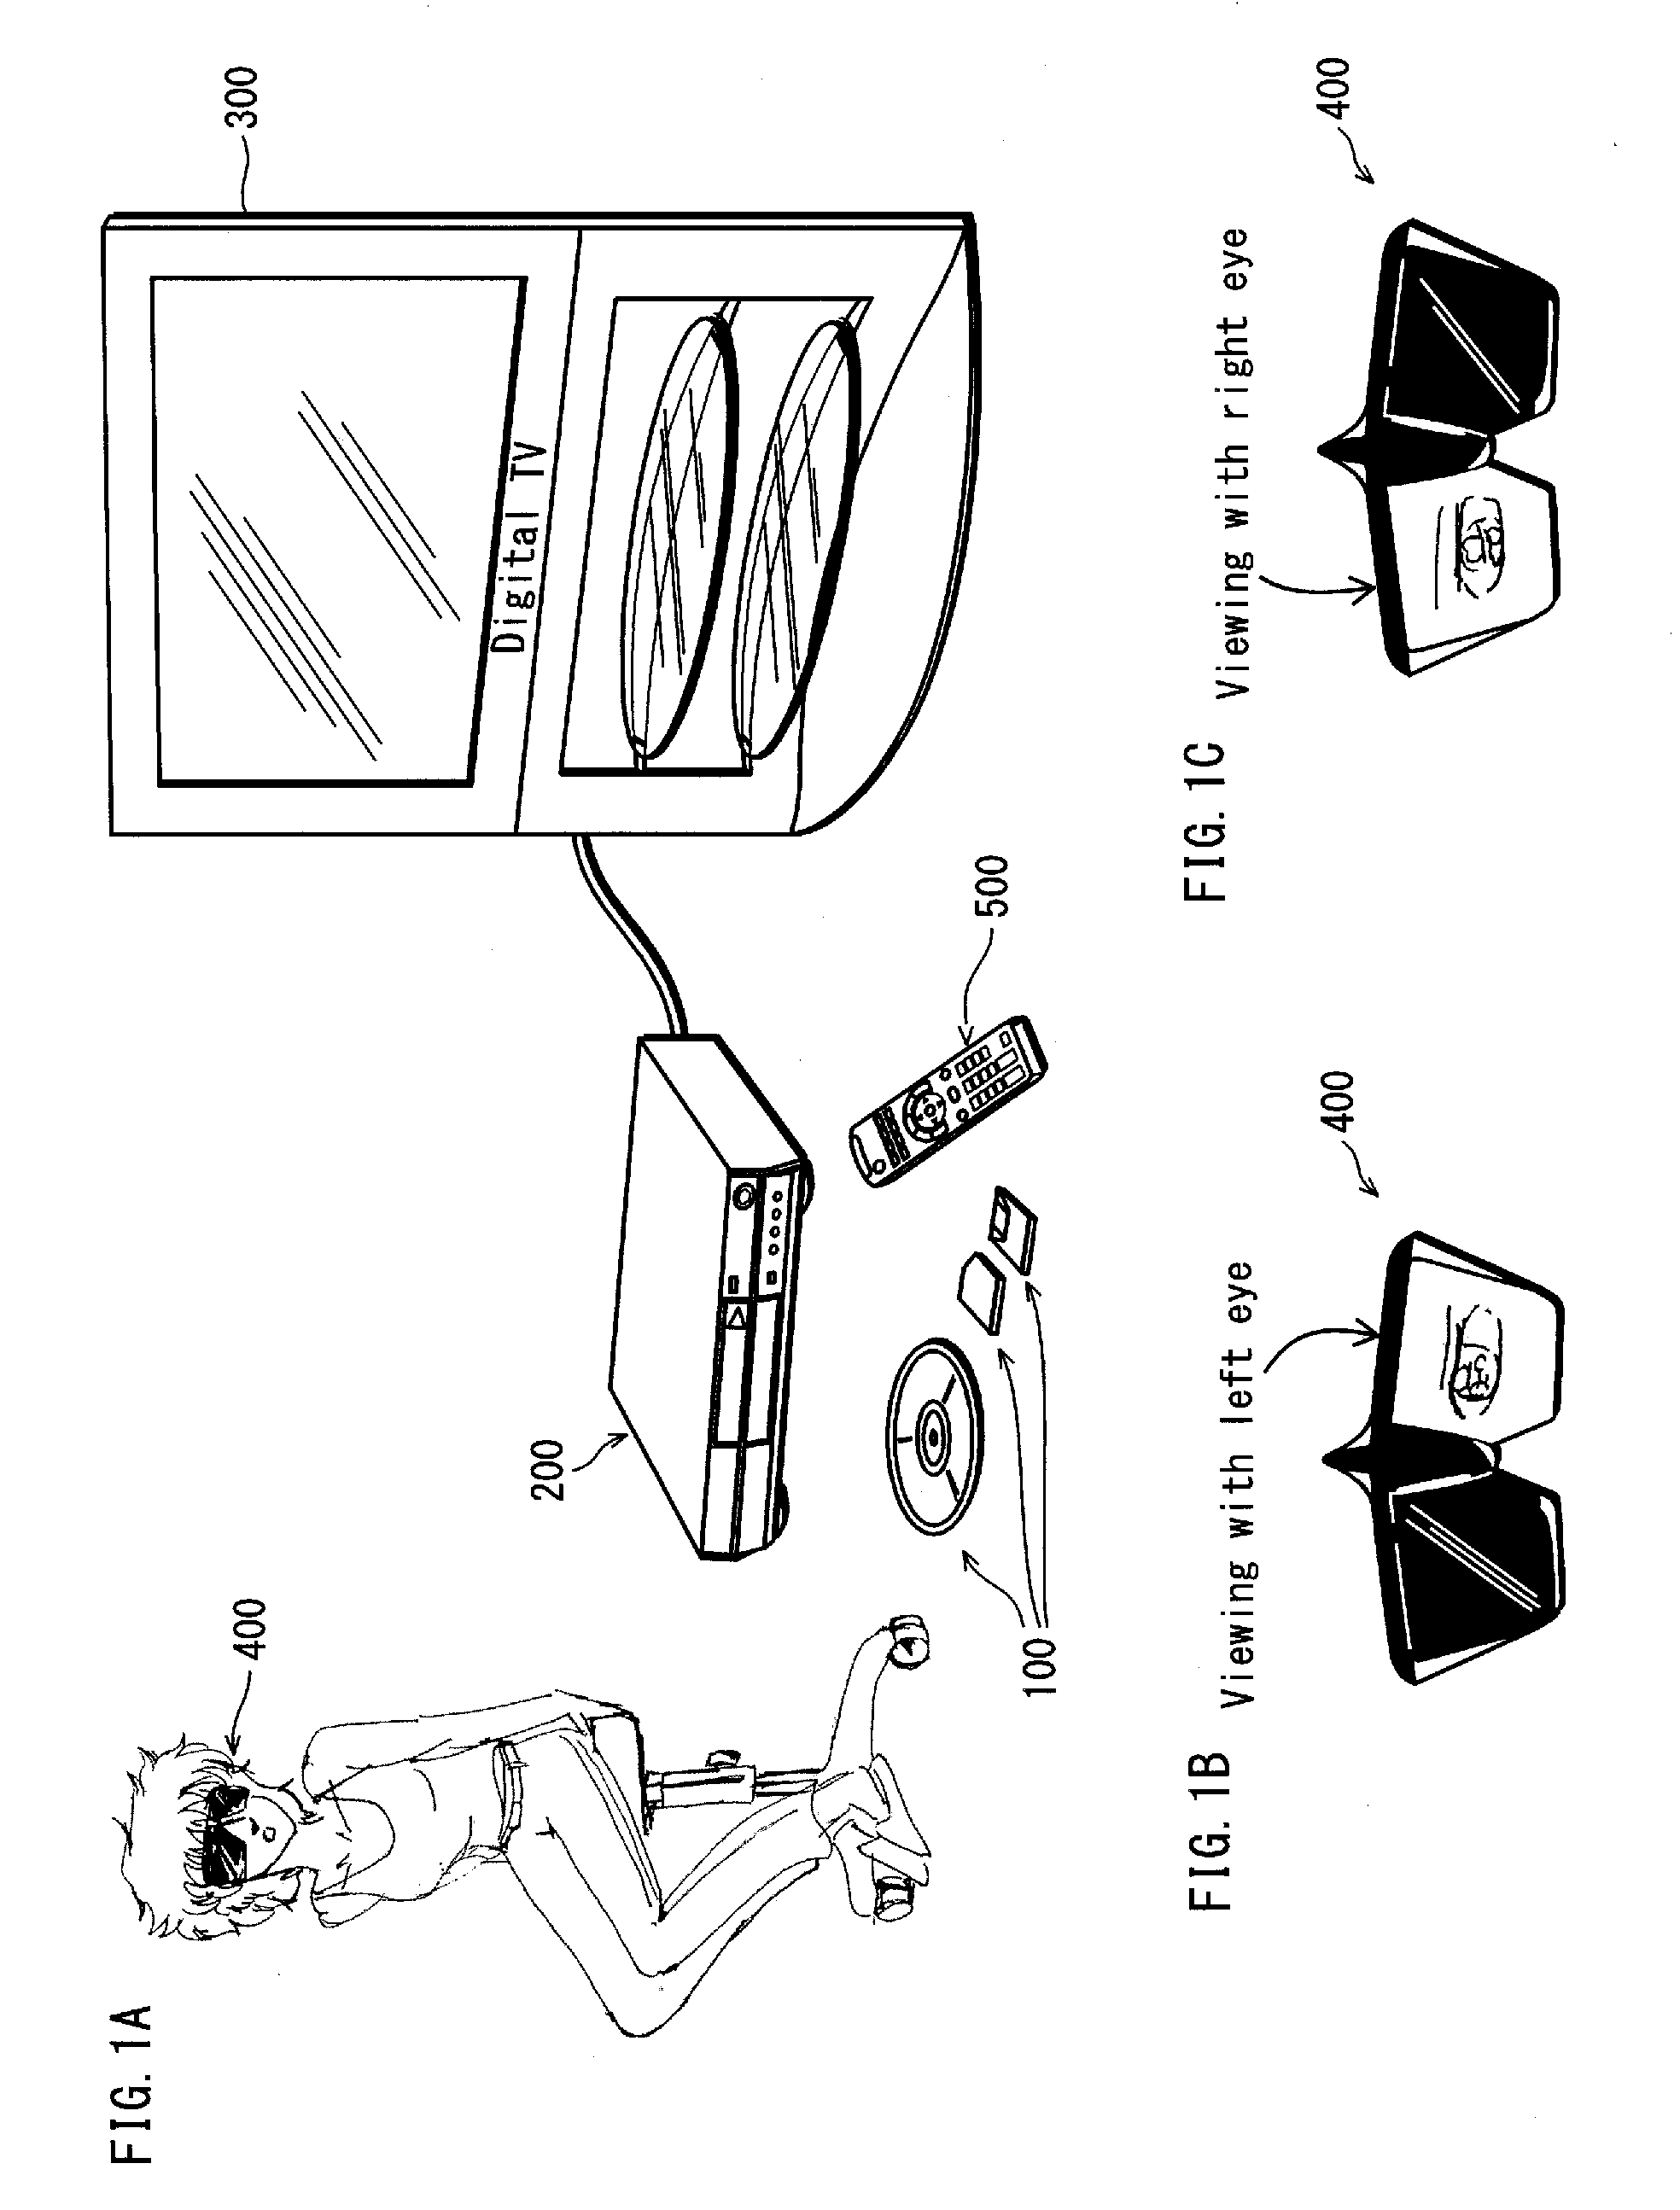 Information recording medium and playback device for playing back 3D images